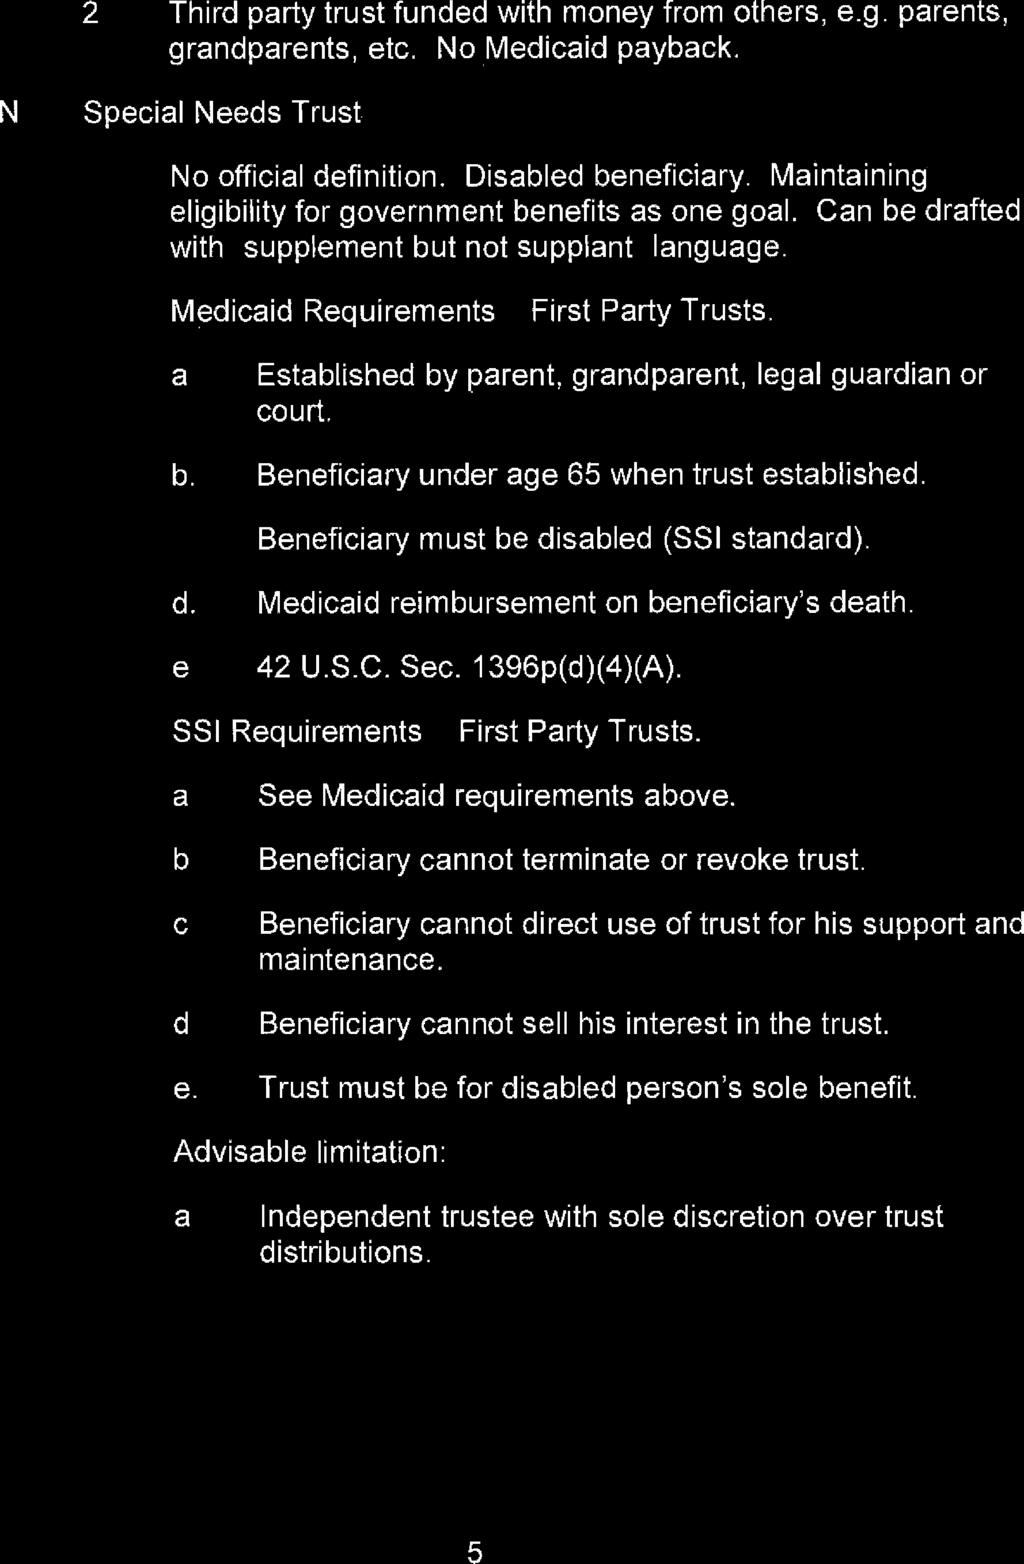 2. Third party trust funded with money from others, e.g. parents, grandparents, etc. No Medicaid payback. Special Needs Trust 1. No official definition. Disabled beneficiary.